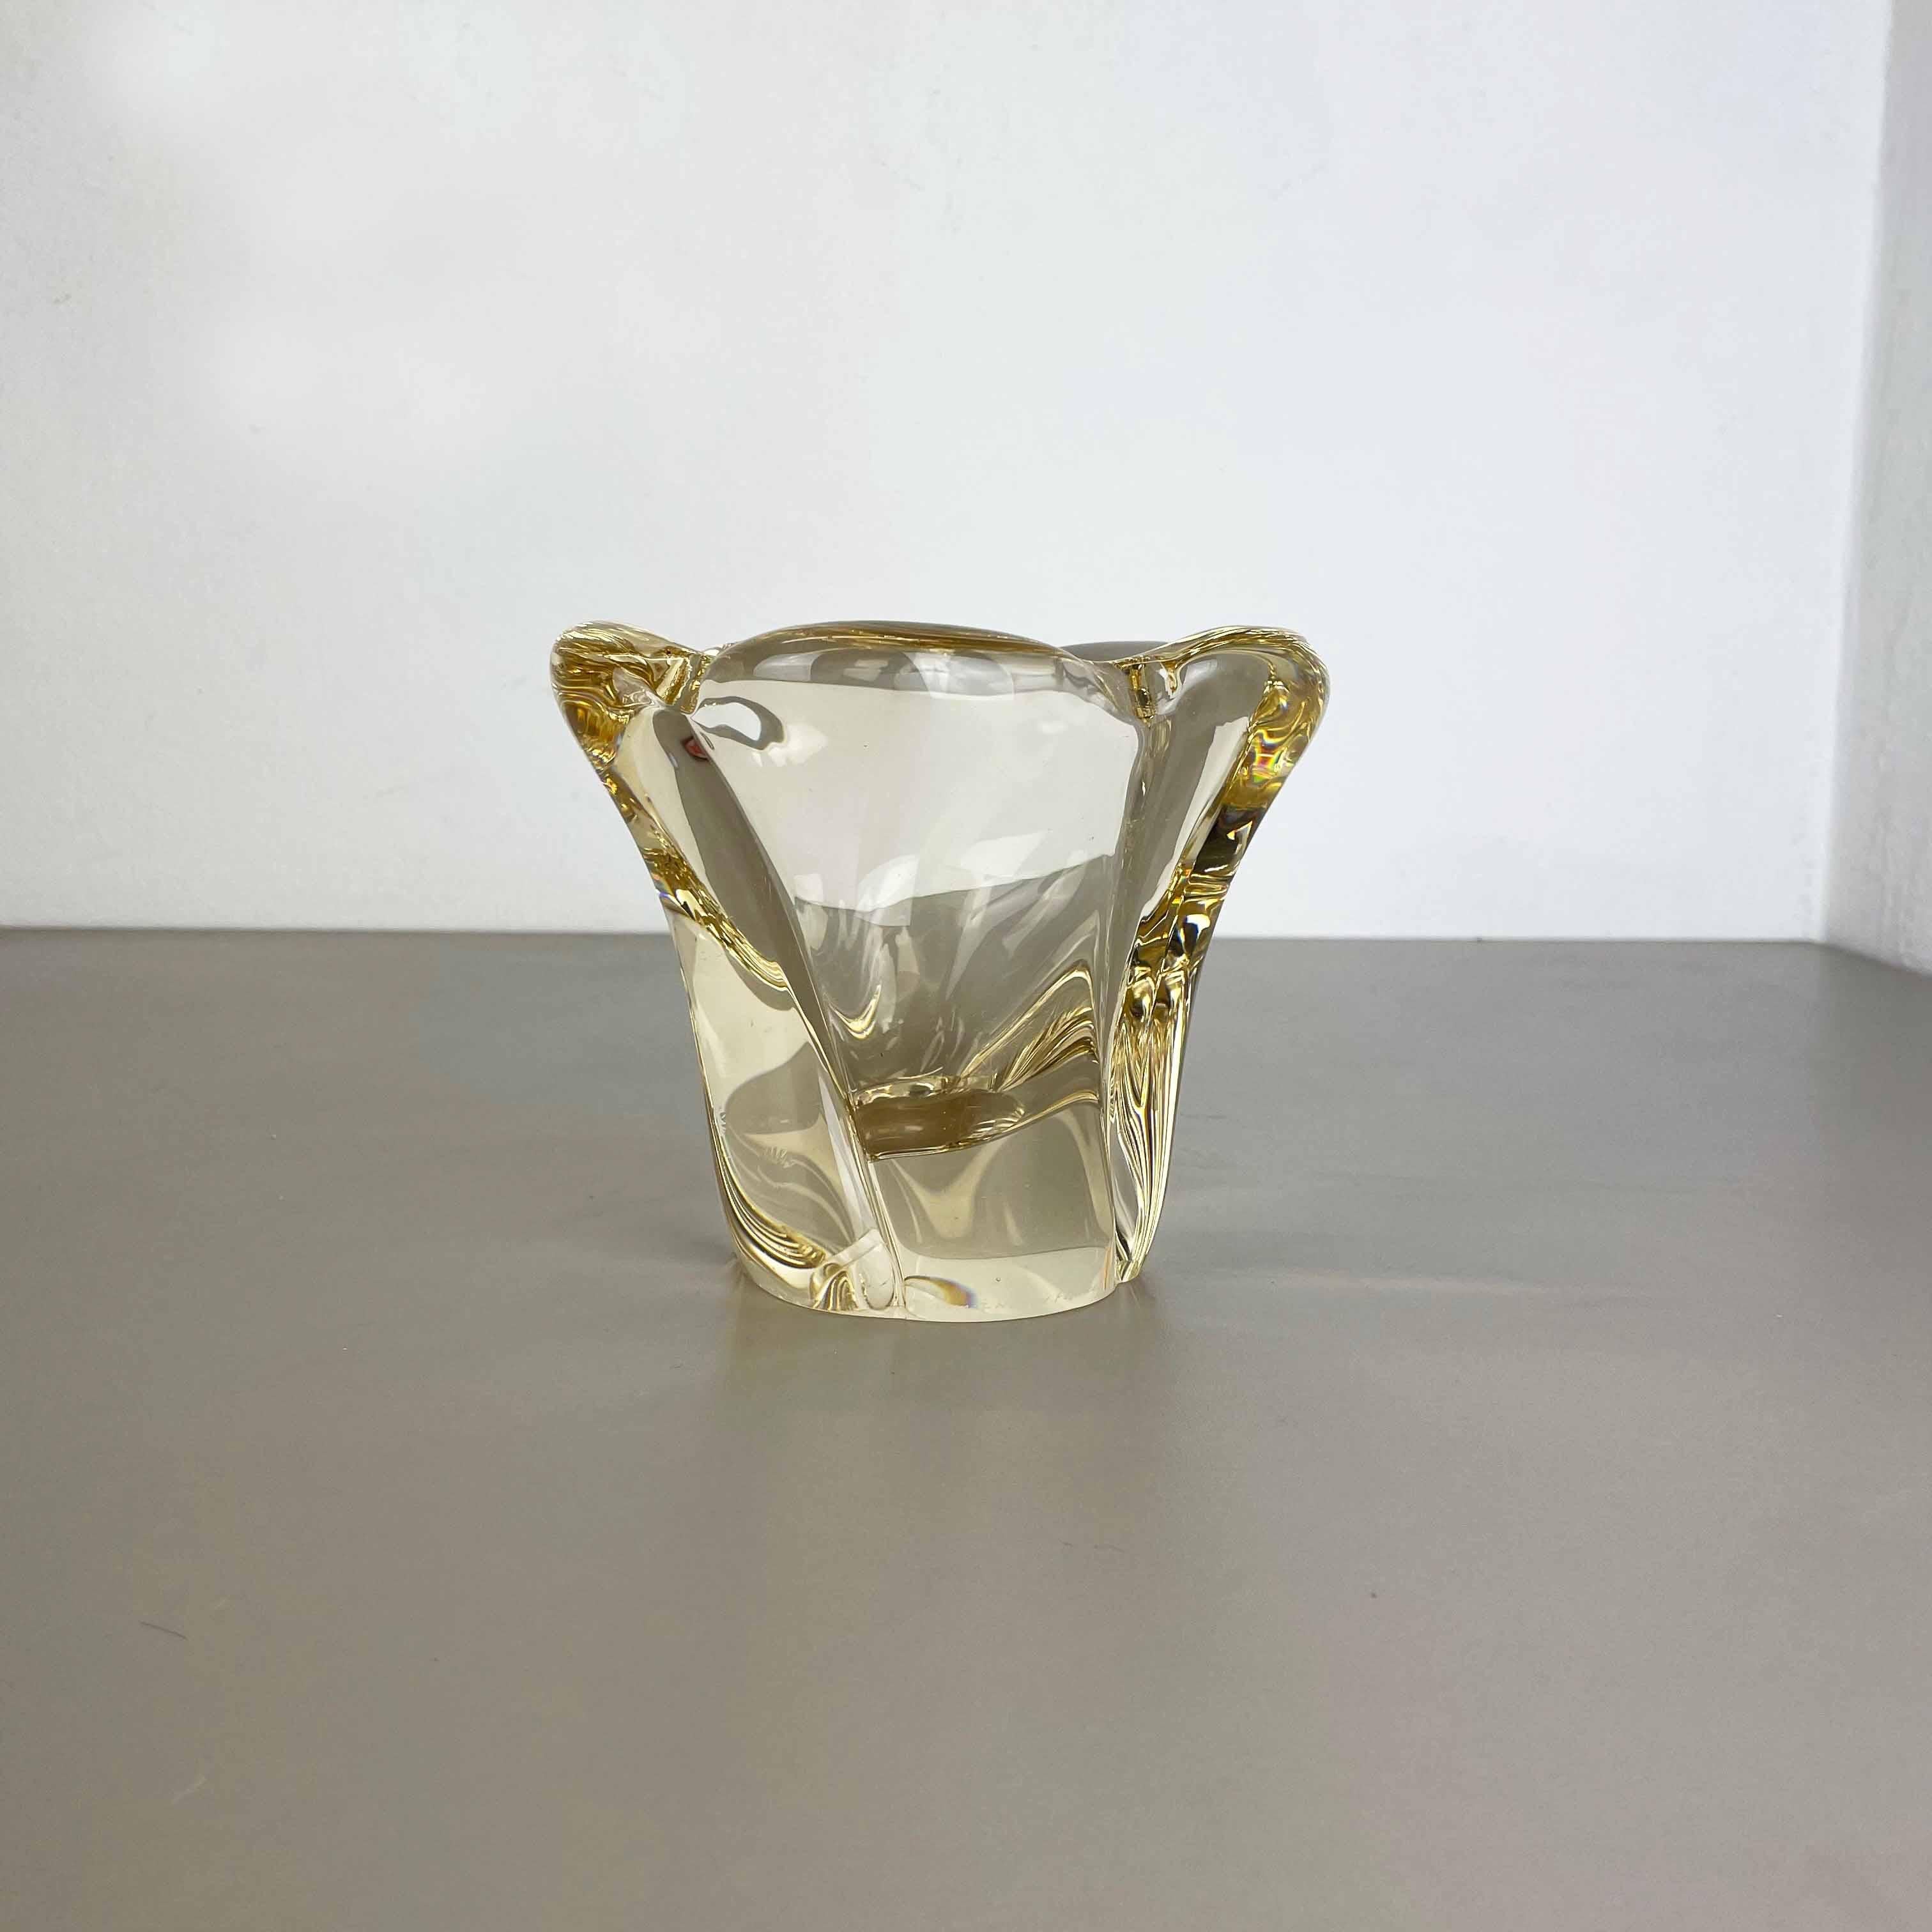 Large 3kg Crystal Glass Centerpiece Shell Bowl by DAUM Nancy, France, 1970s In Good Condition For Sale In Kirchlengern, DE